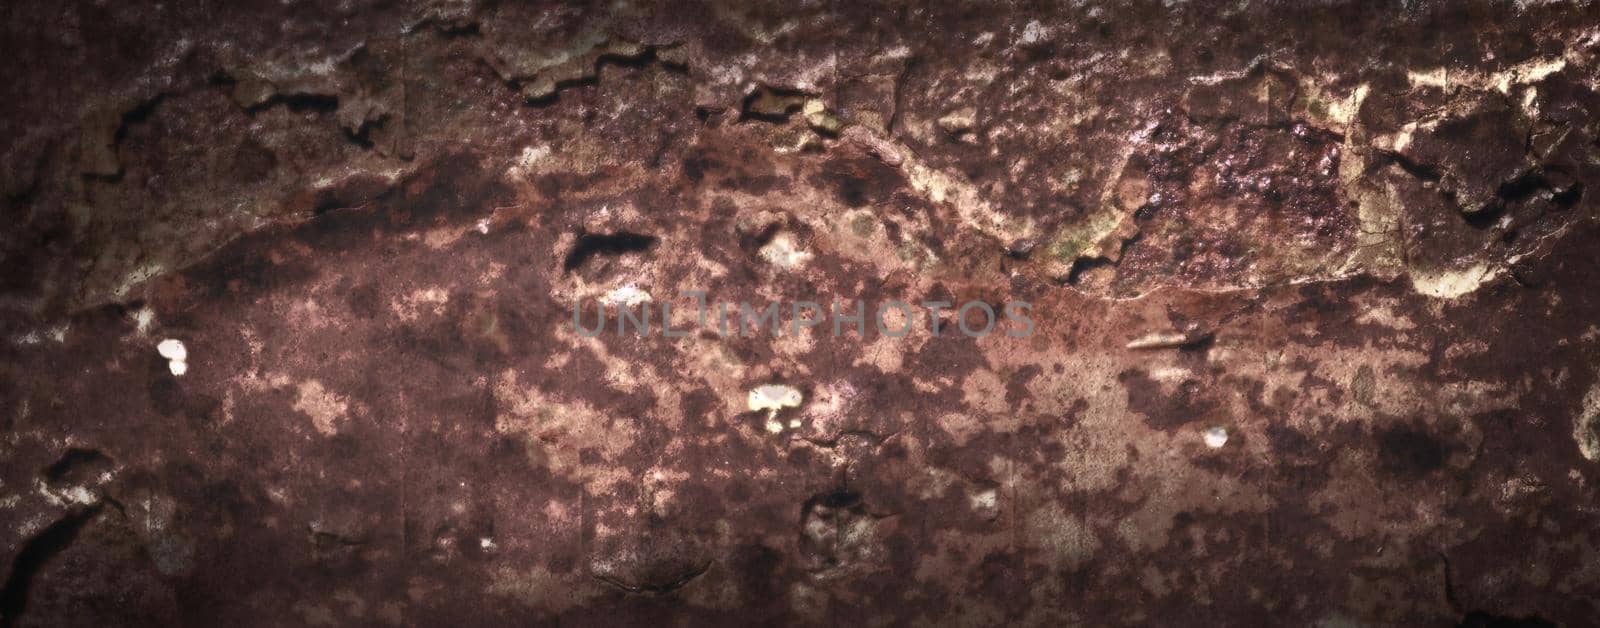 Detailed close up surface of rusty metal and steel with lots of corrosion in high resolution by MP_foto71